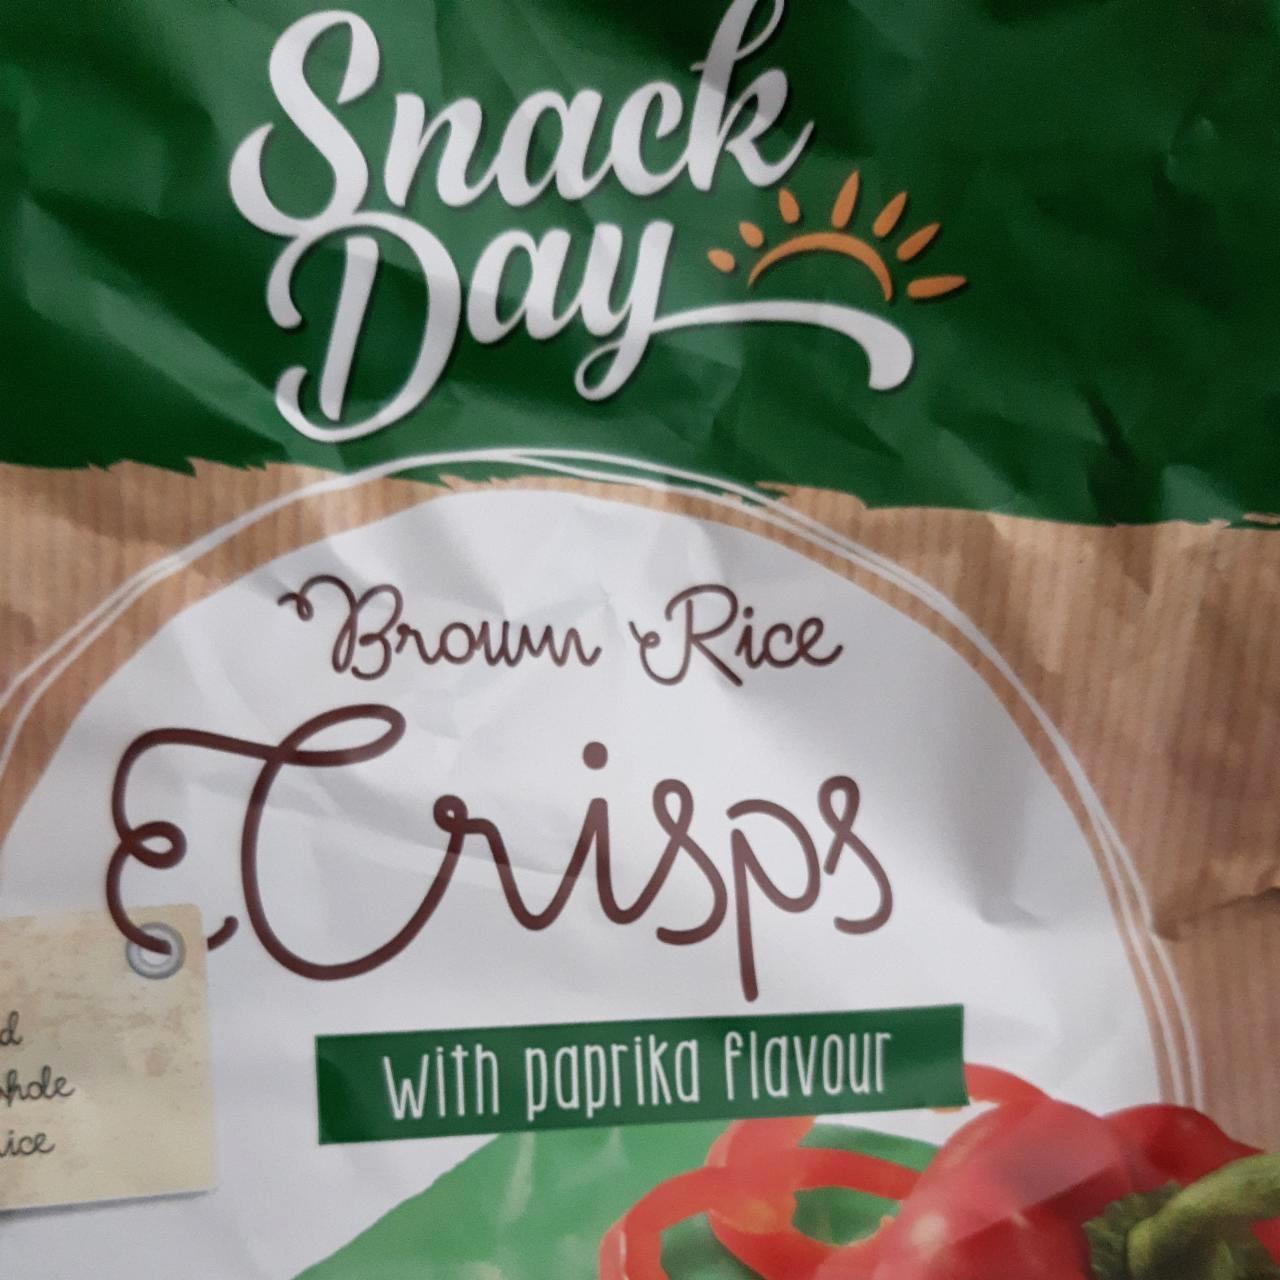 Képek - Brown rice crisps with paprika flavour Snack Day